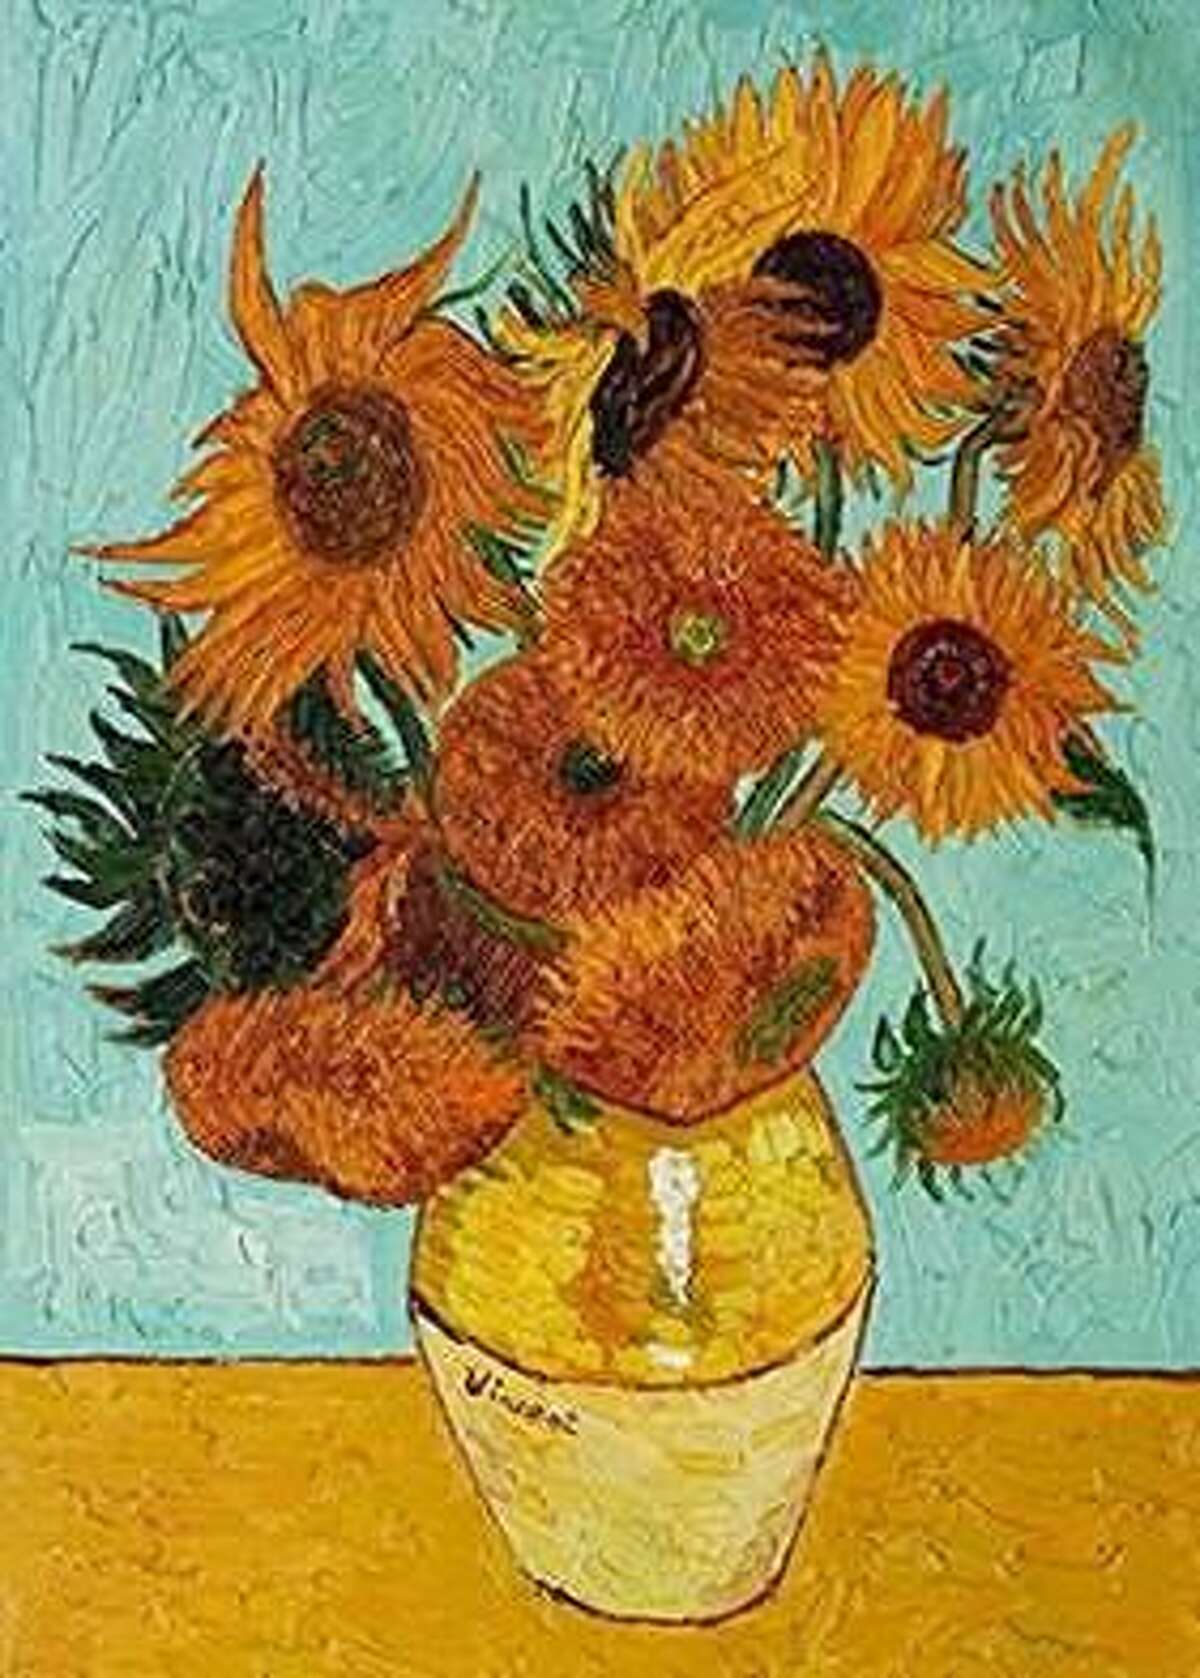 Sip and Paint Van Gogh Sunflowers Ladies Night Out is on March 12 at 7 p.m. at the Darien Arts Center, Visual Arts Studio, 2 Renshaw Road, Darien. Tickets are $45. For more information, visit darienarts.org.